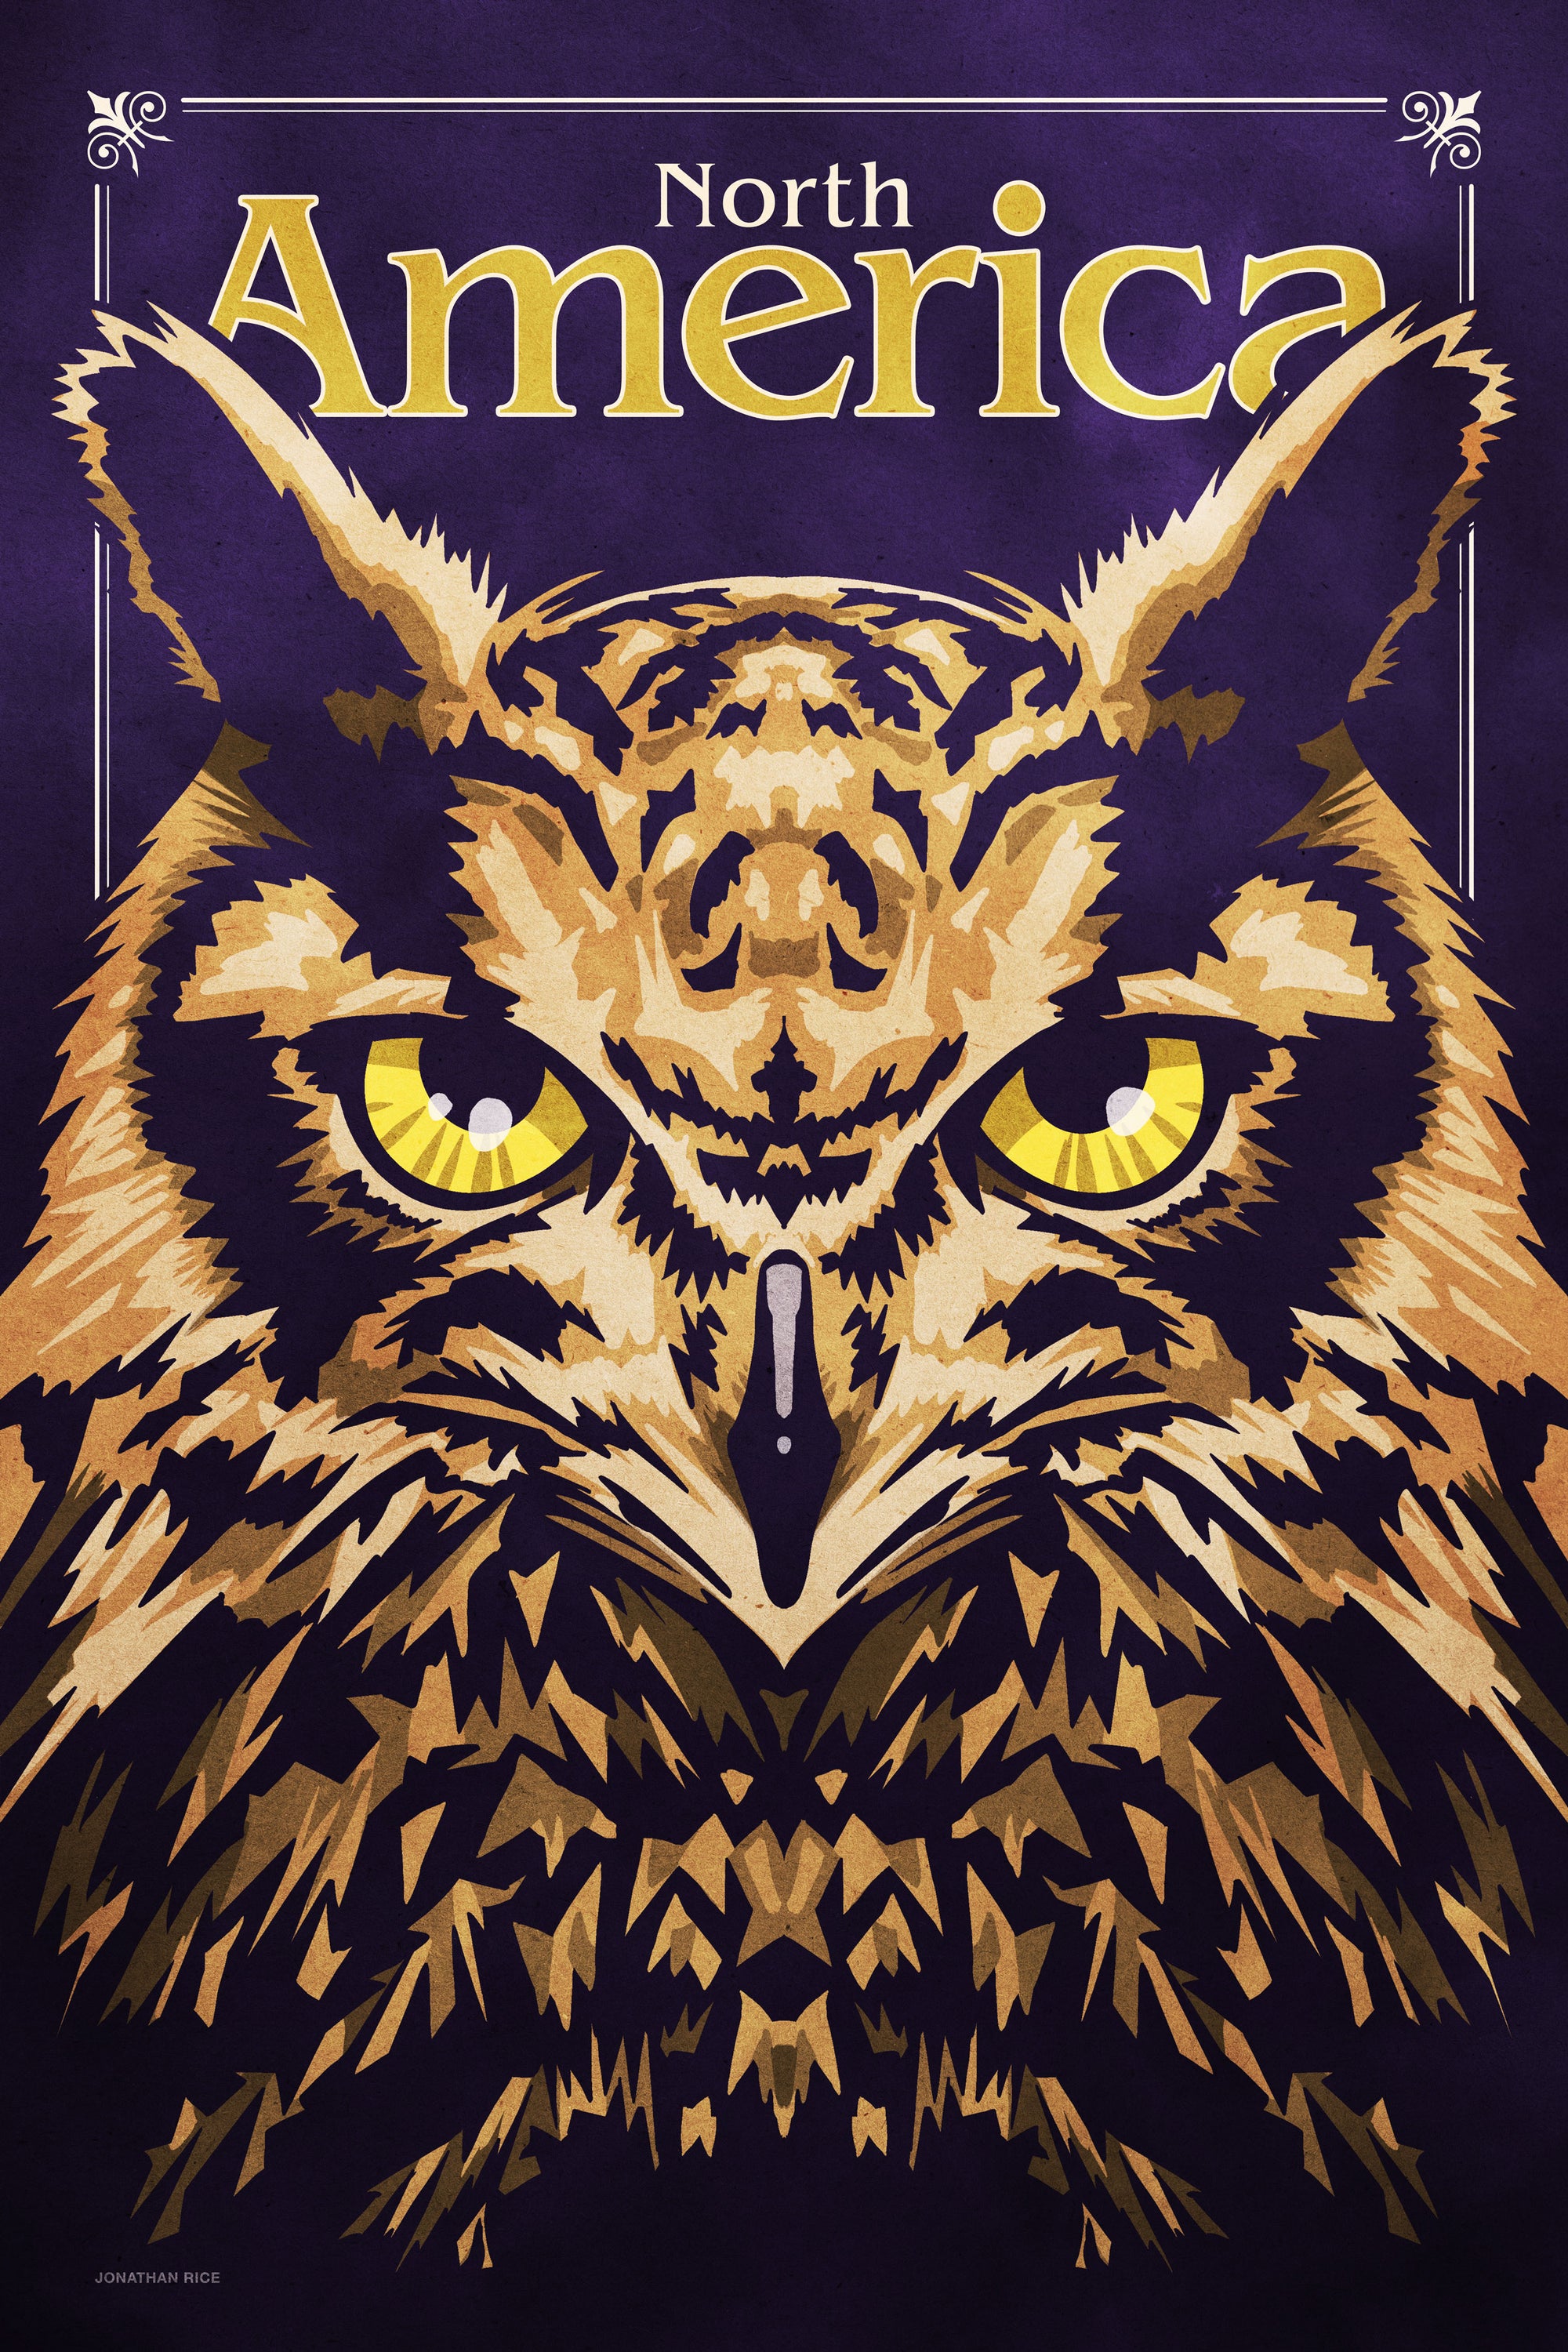 Bold graphic giclée art print of a North American Great Horned Owl. Print shows a North American Great Horned Owl blending into a dark blue background and overlapping the words “North America”.